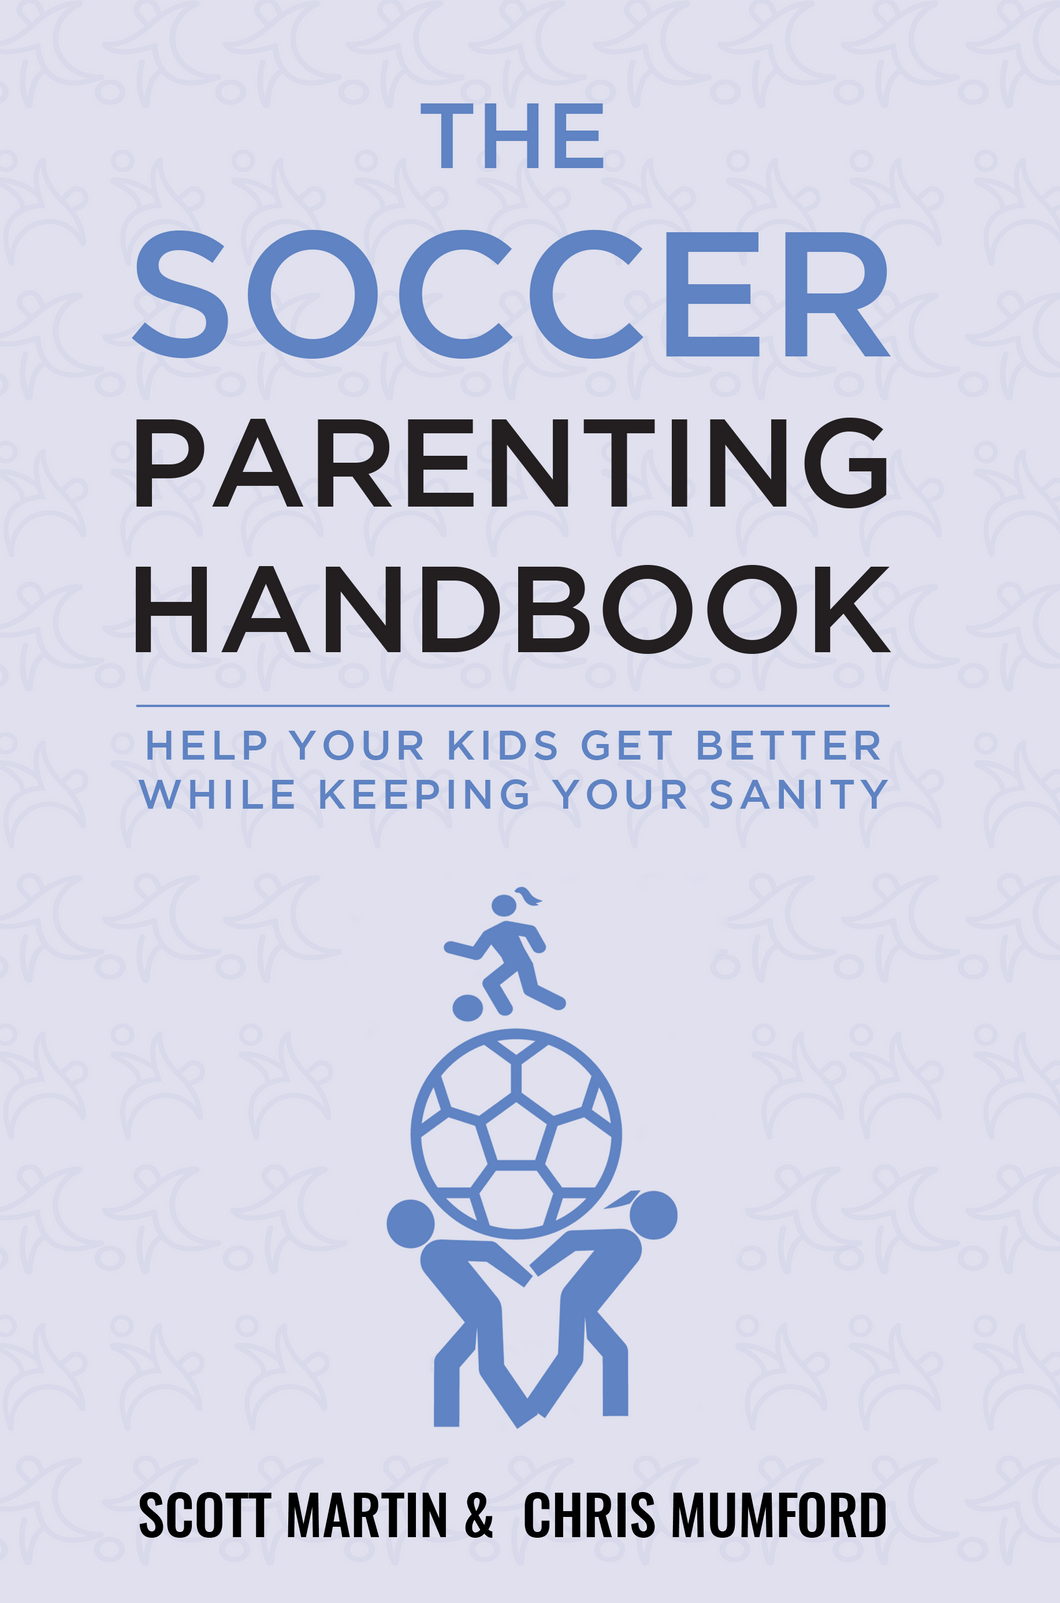 Soccer Parenting Handbook - Help Your Kids Get Better While Keeping Your Sanity